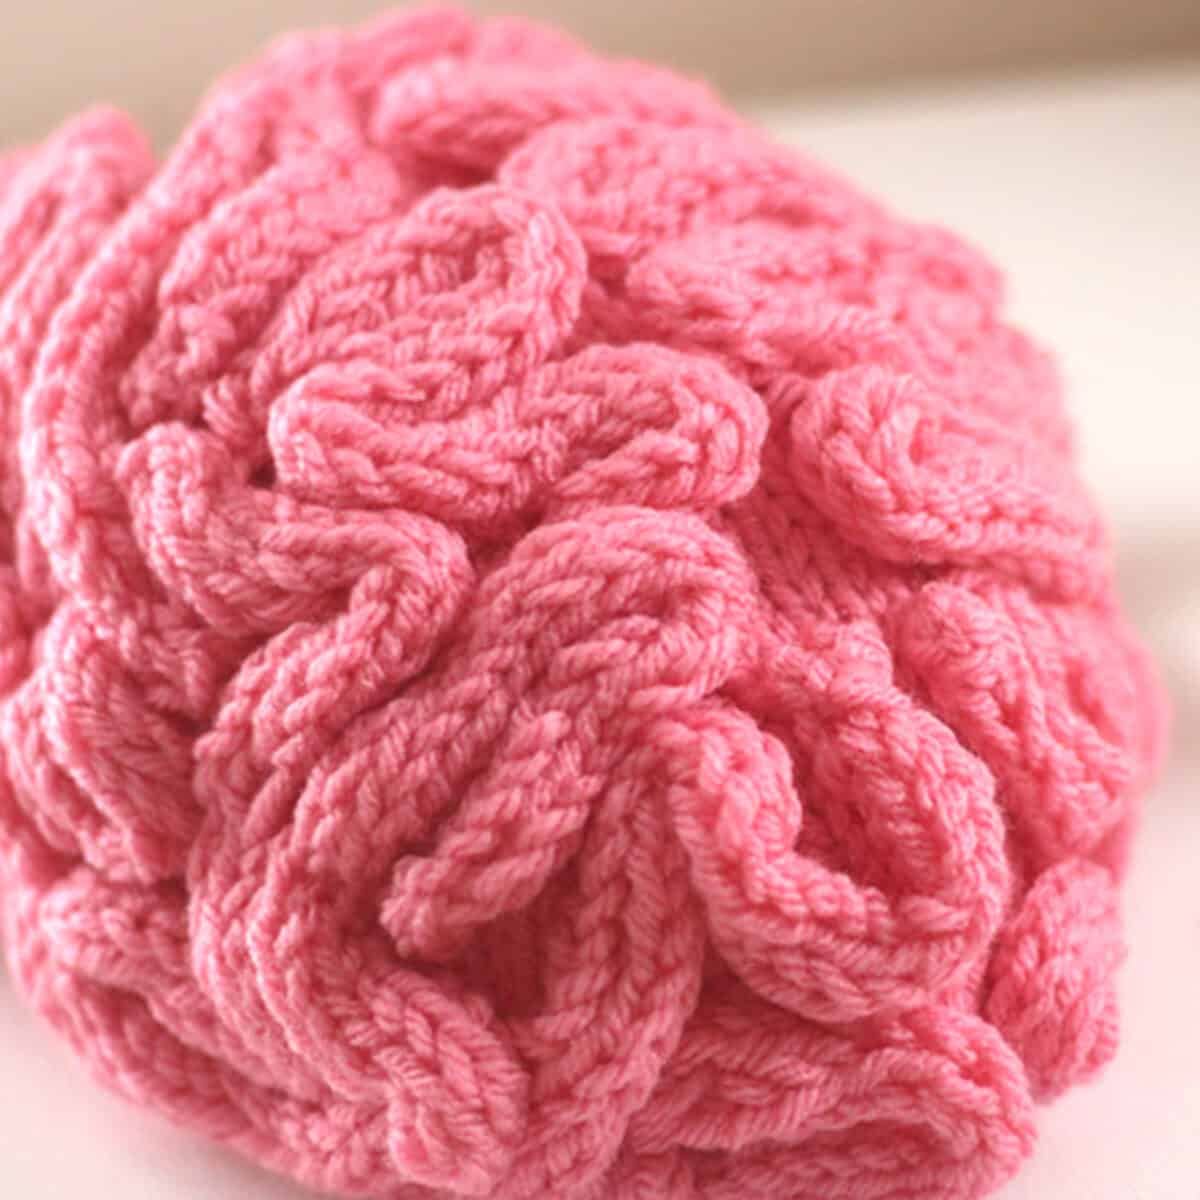 Knitted Brain Hat in pink color yarn.